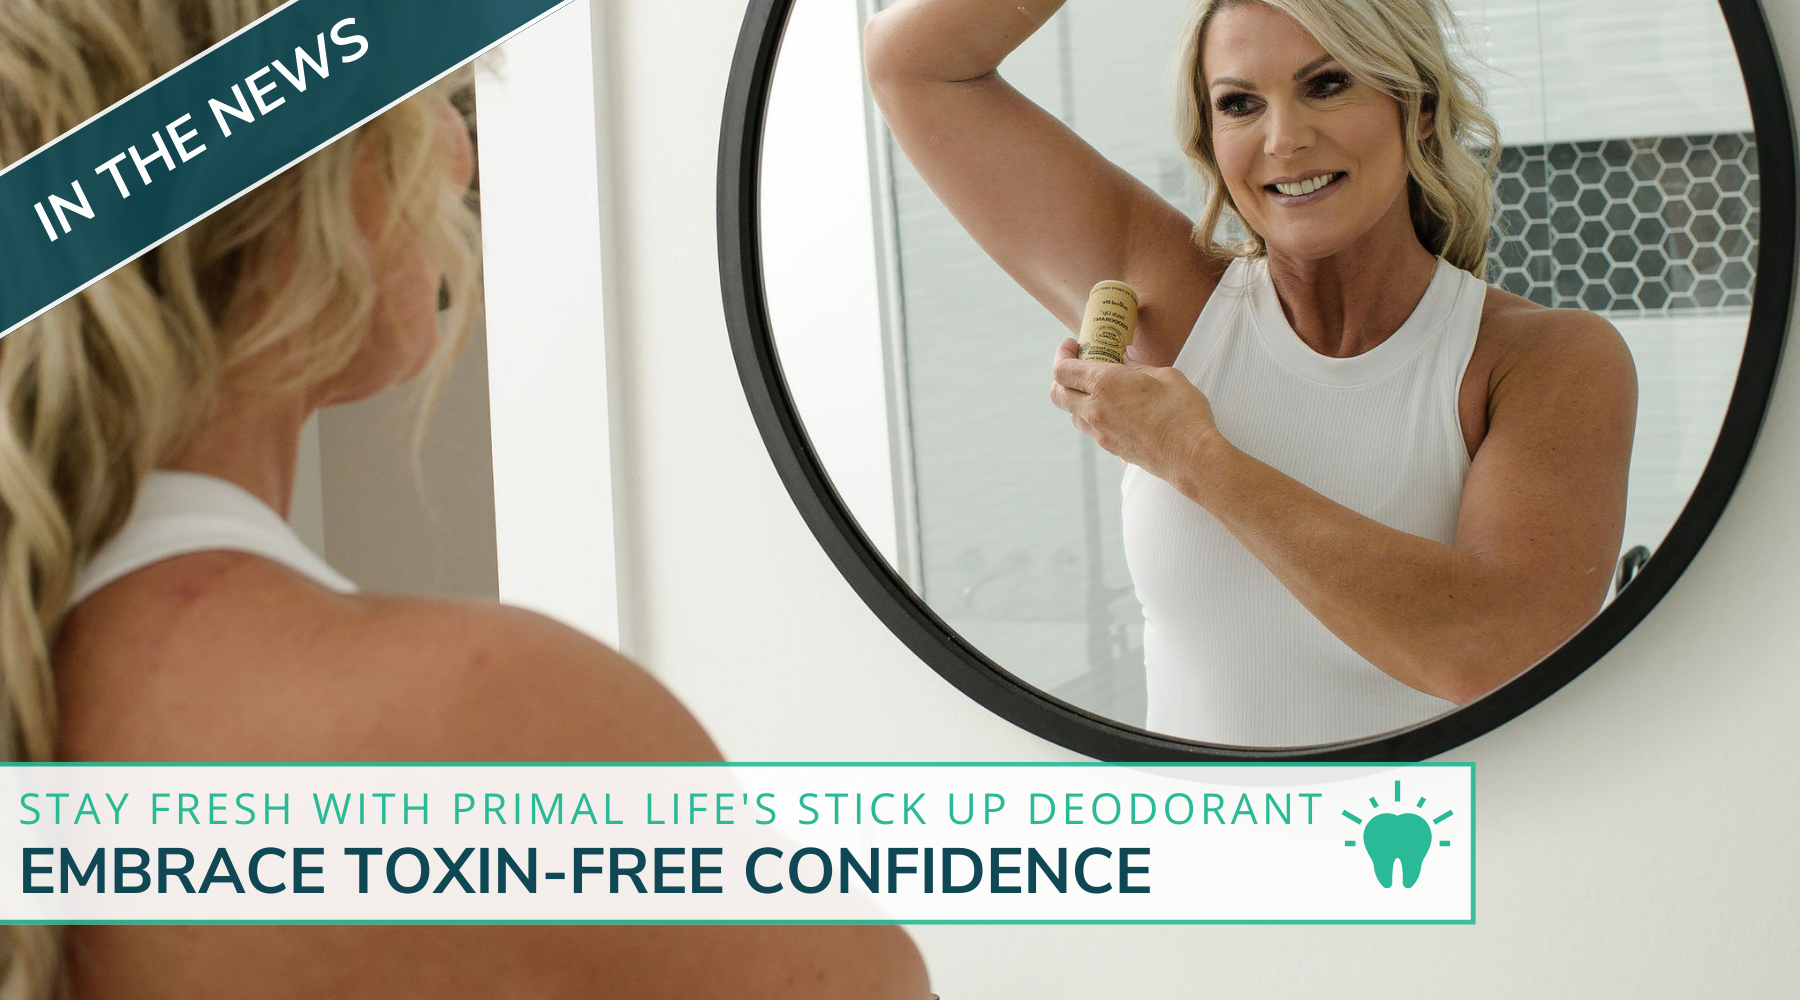 Embrace Toxin-Free Confidence: Stay Fresh With Primal Life's Stick Up Deodorant